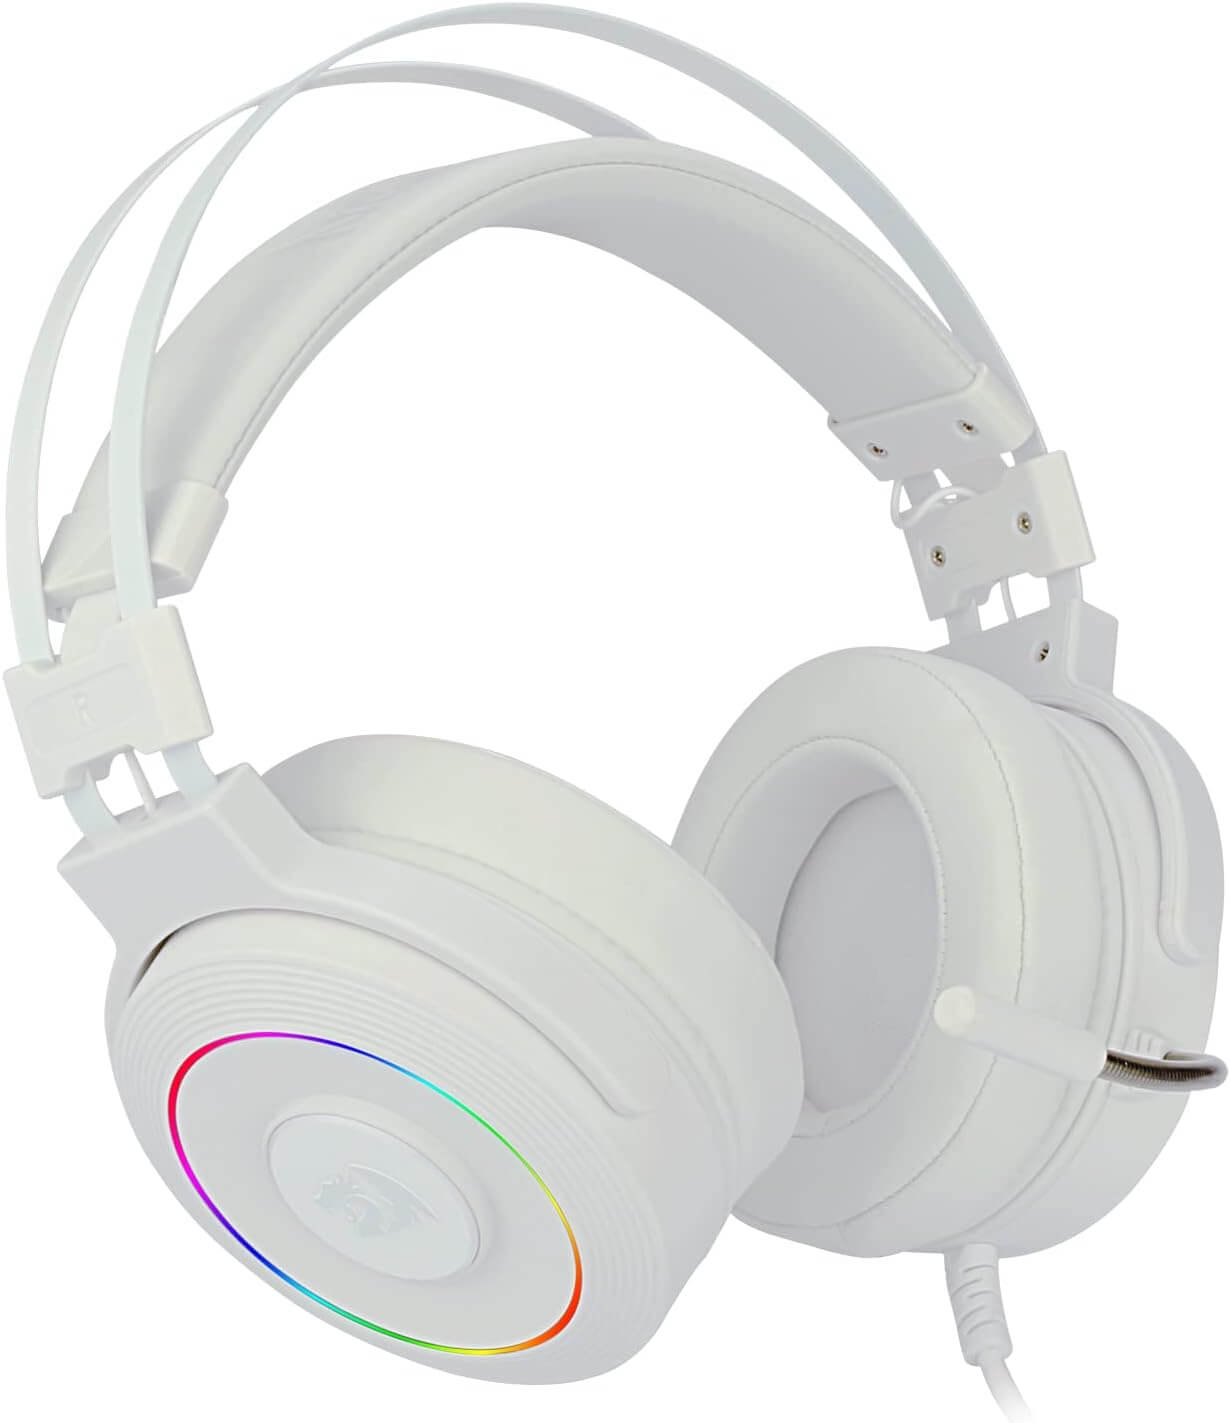 Redragon H320W Lamia 2 Lunar White Gaming Headset with 7.1 Surround Sound, Volume Control, Noise Cancelling, RGB Light, Stand, Over Ear Wired Headphone, with Mic for PC, PS4